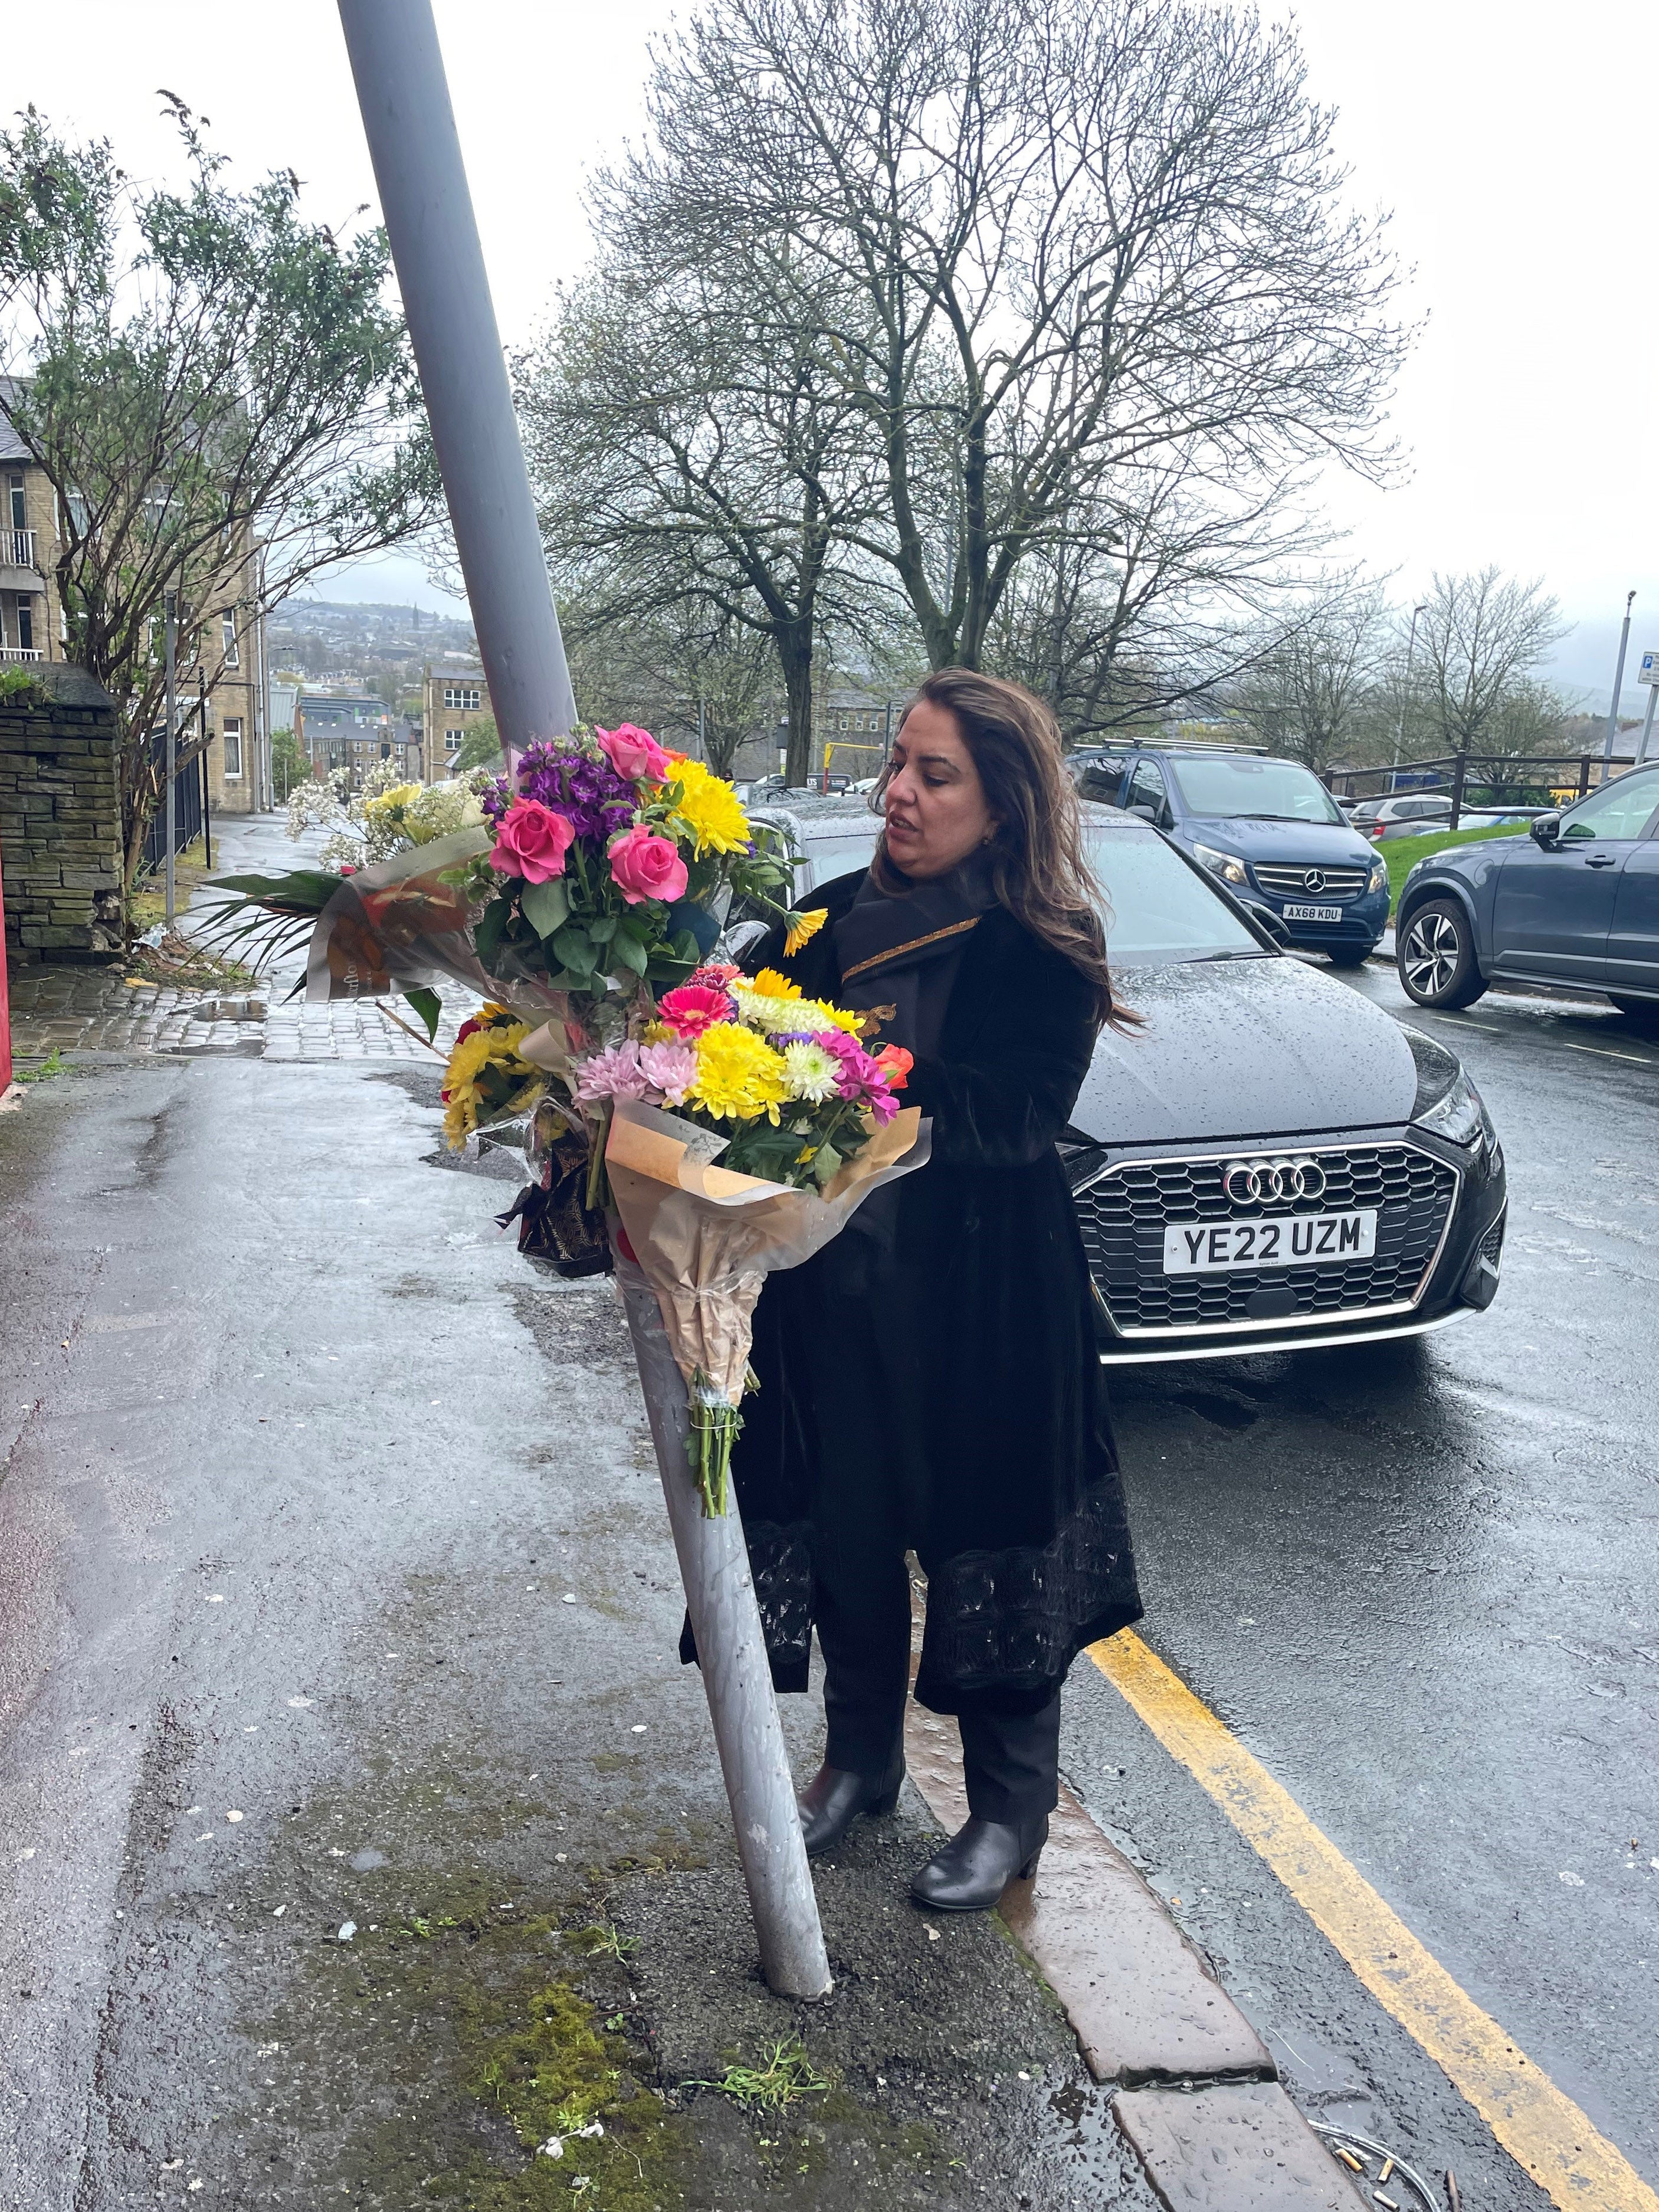 Labour MP Naz Shah lays flowers at the scene in Westgate, Bradford